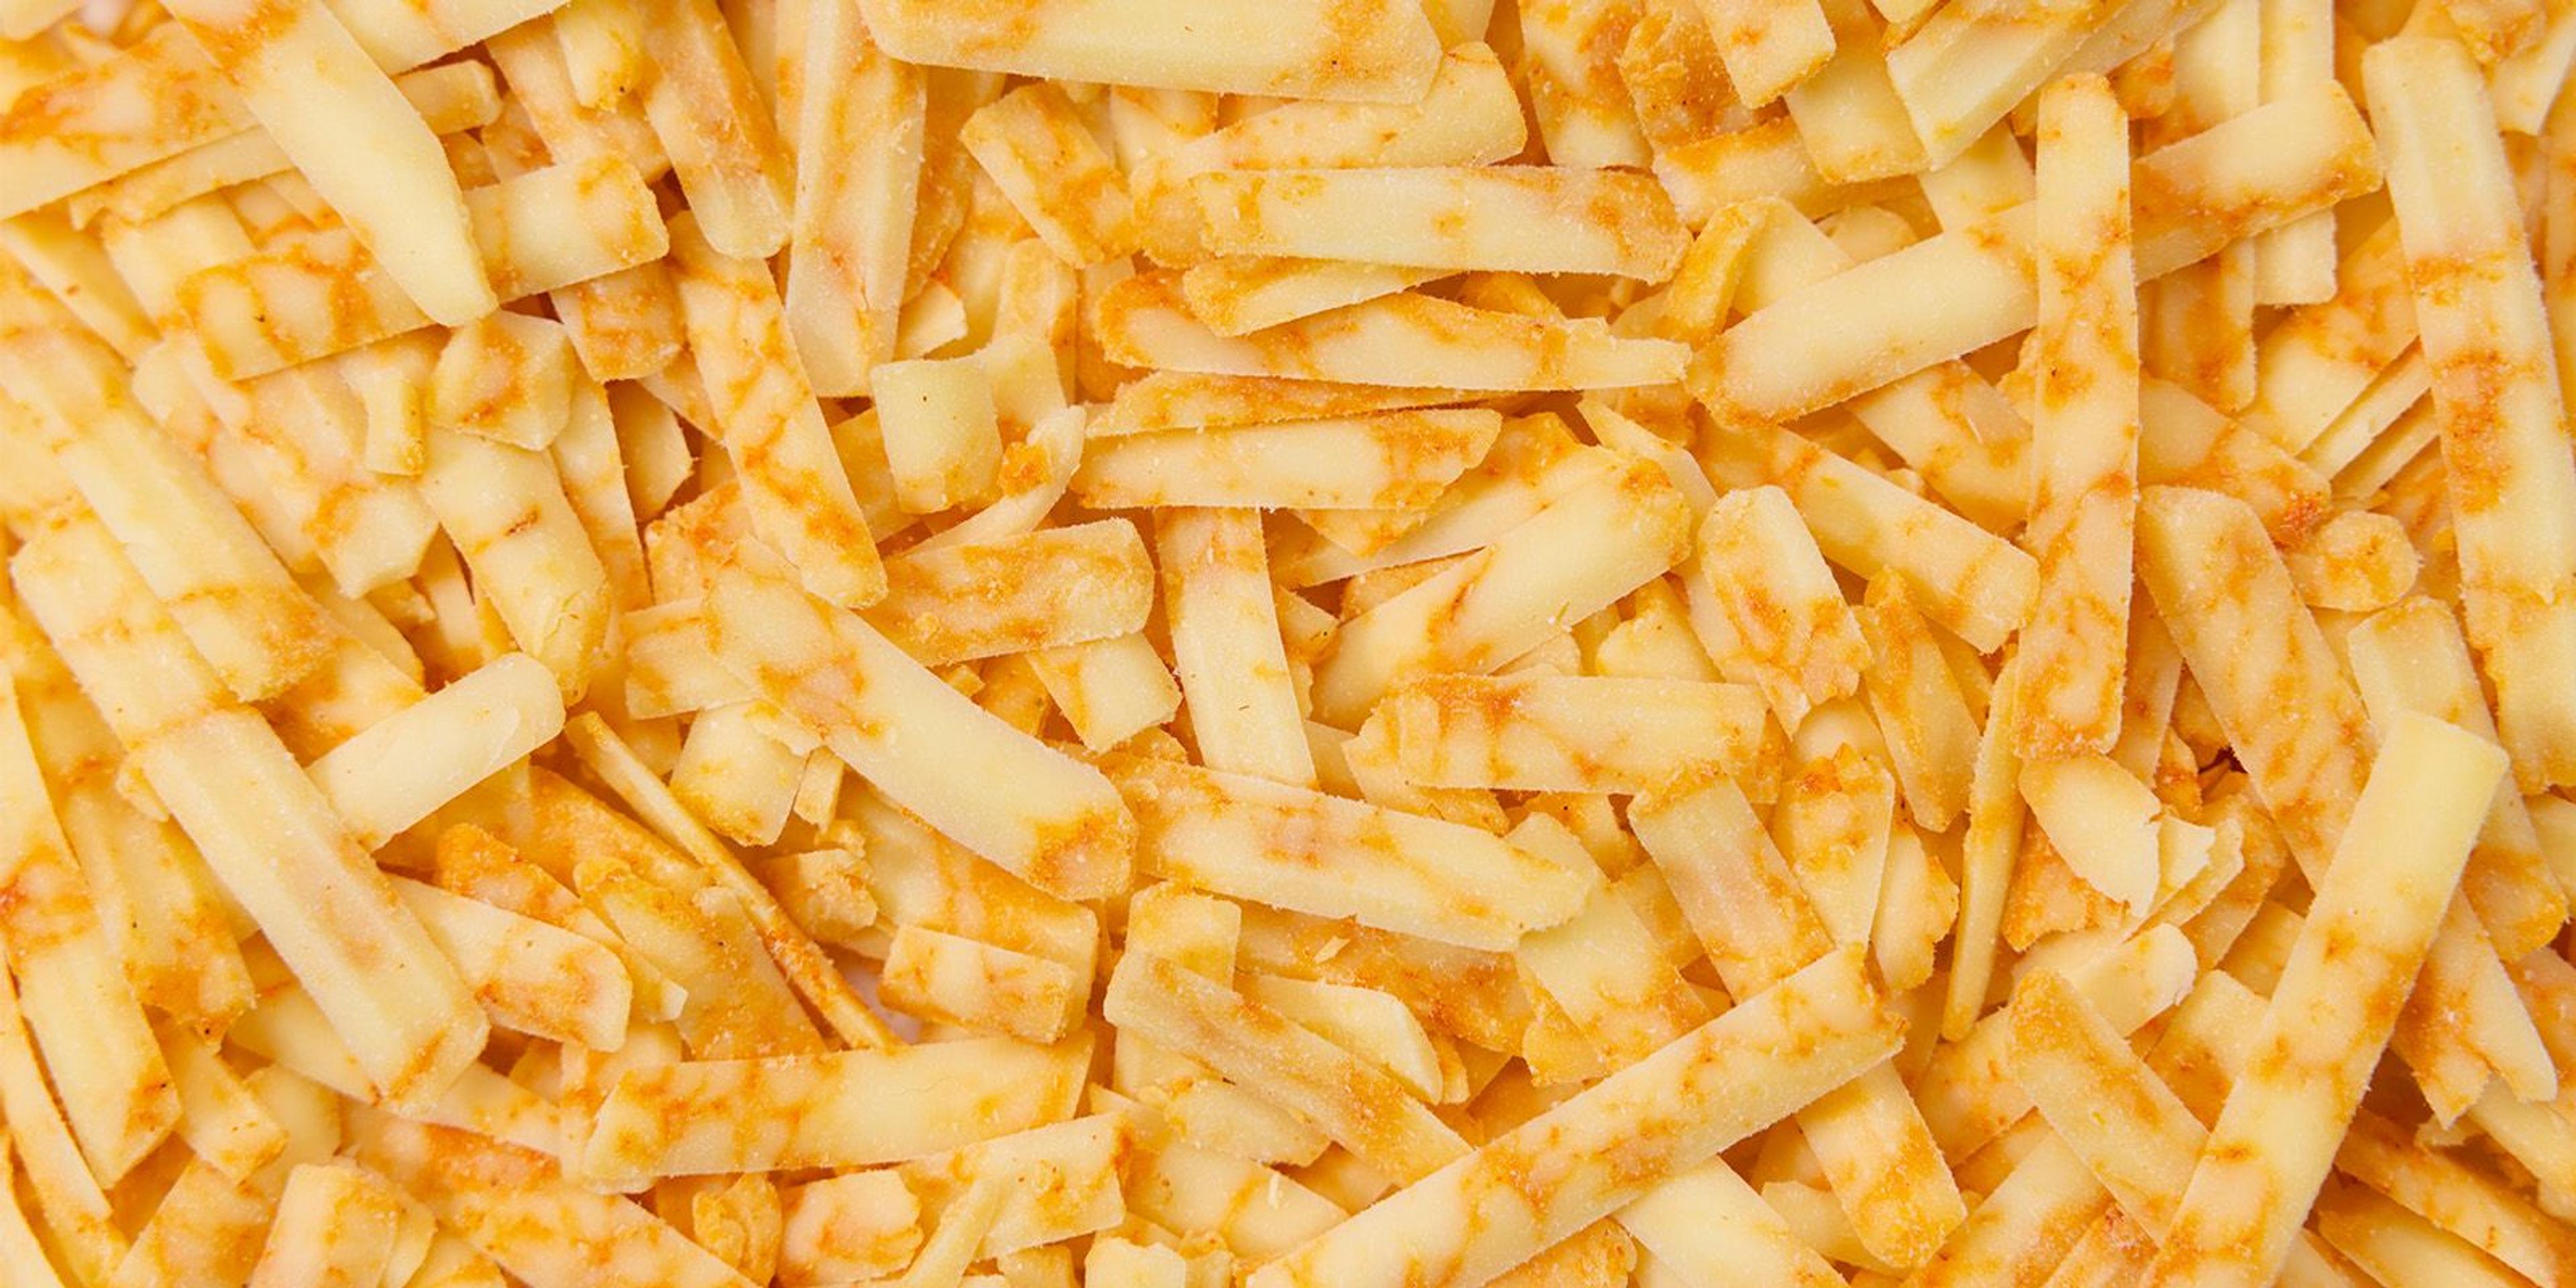 Thick cuts of shredded cheese that look like orange and white marbling.